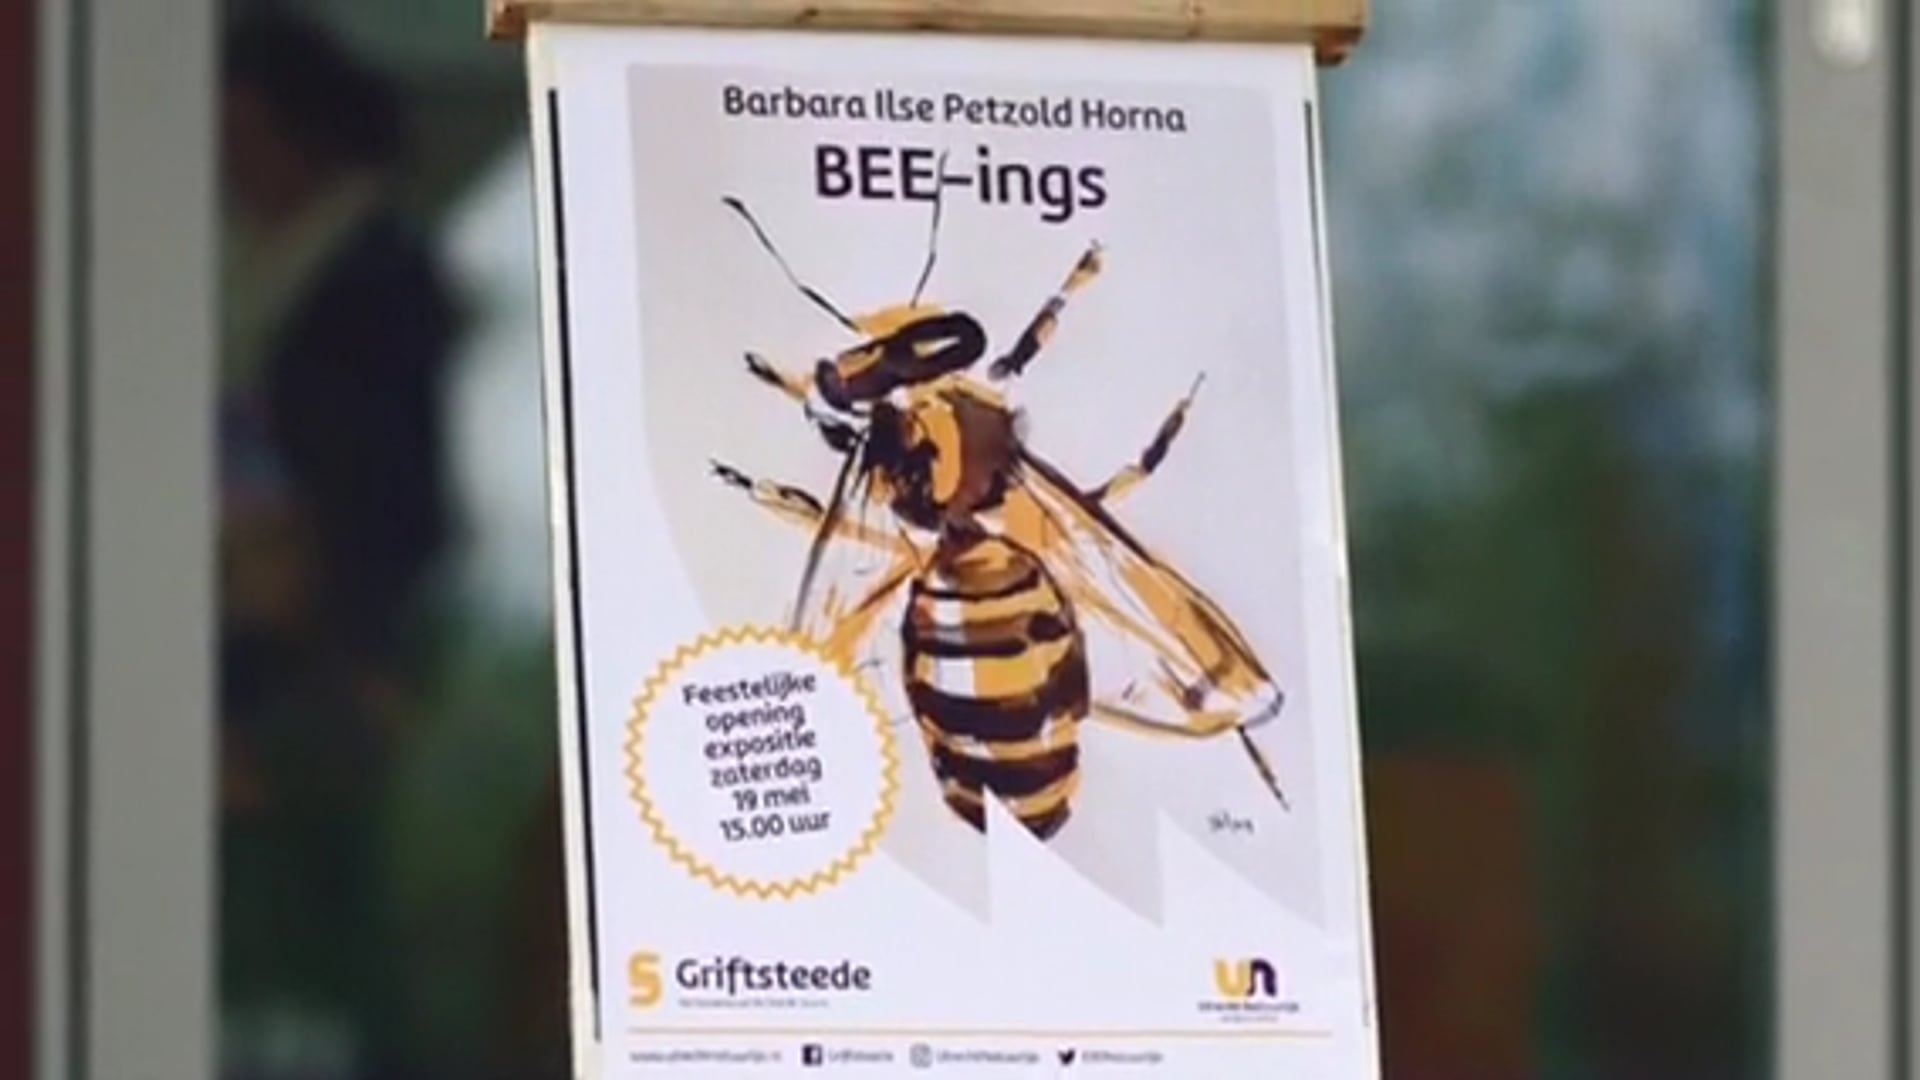 Exhibition BEE-ings at the Griftsteede